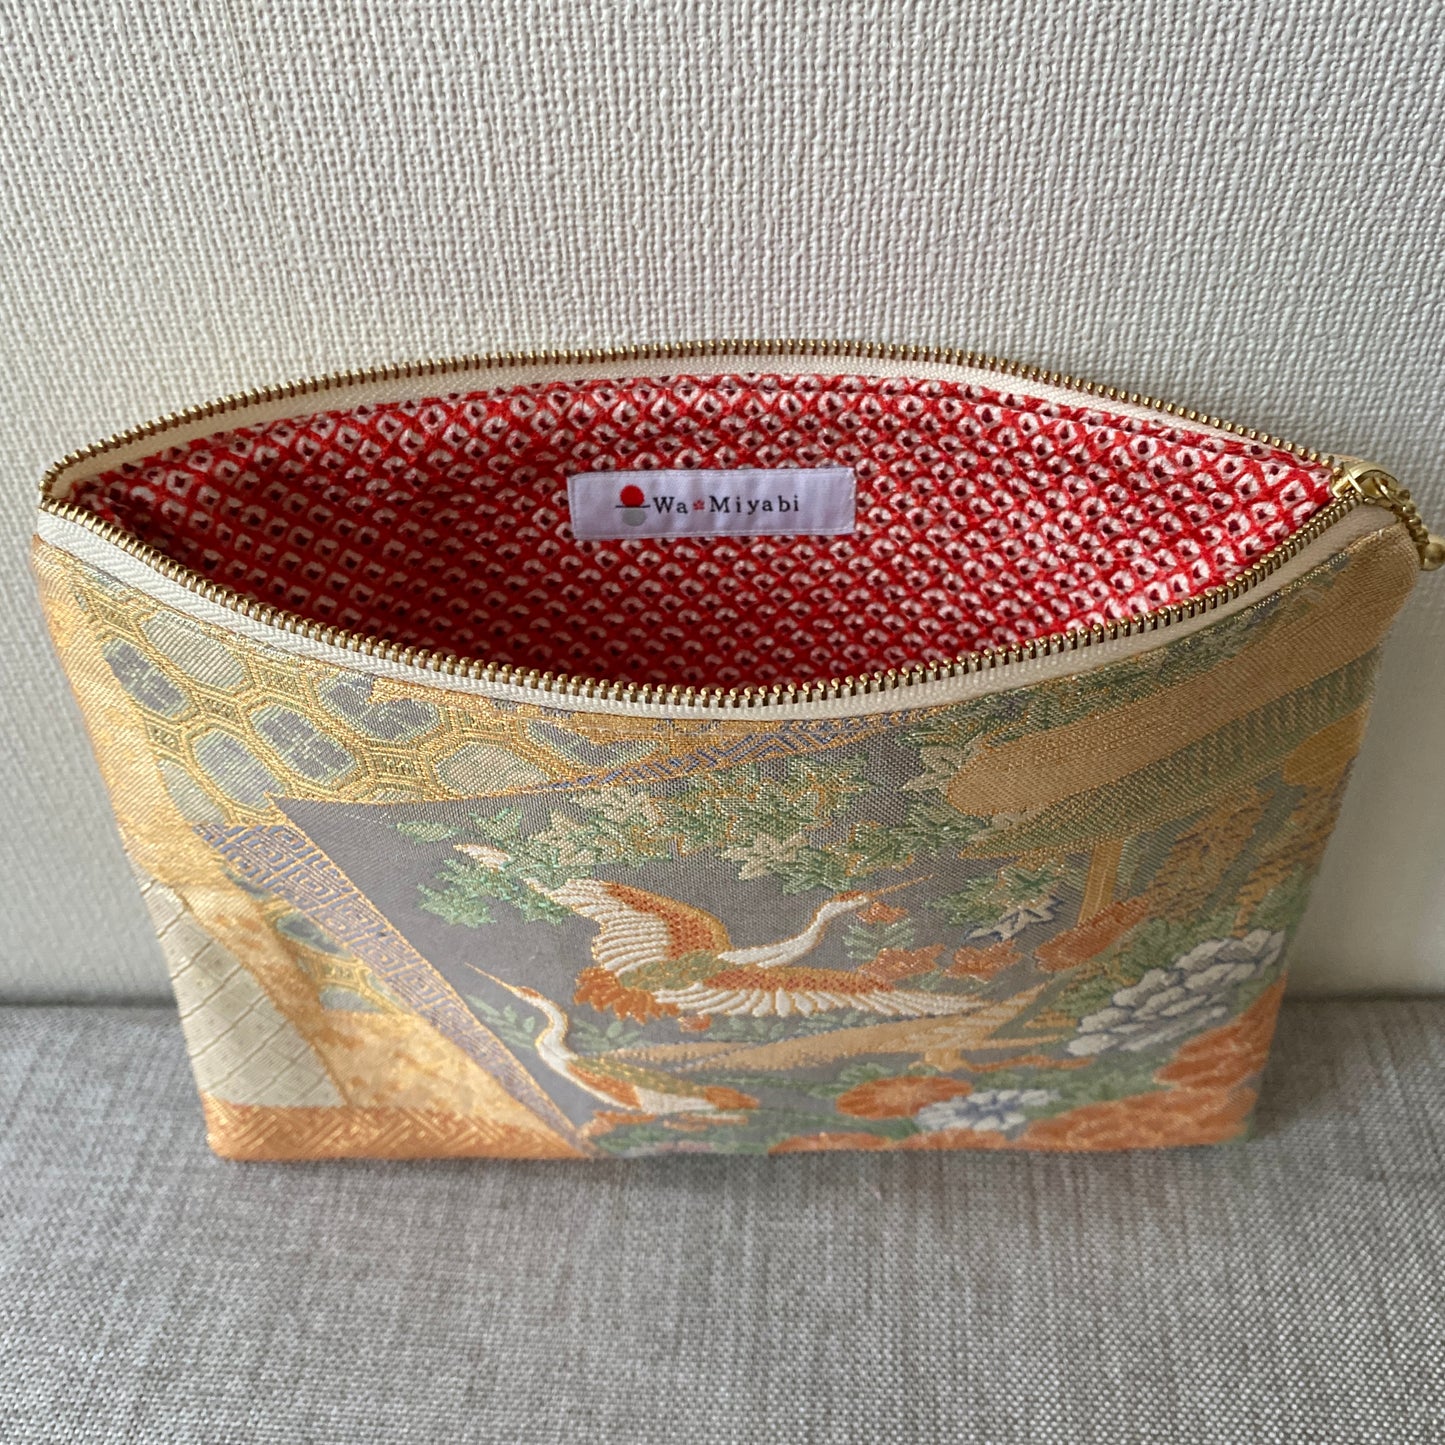 Flat silk Obi pouch, Medium size, Handcrafted, Upcycled, #3002